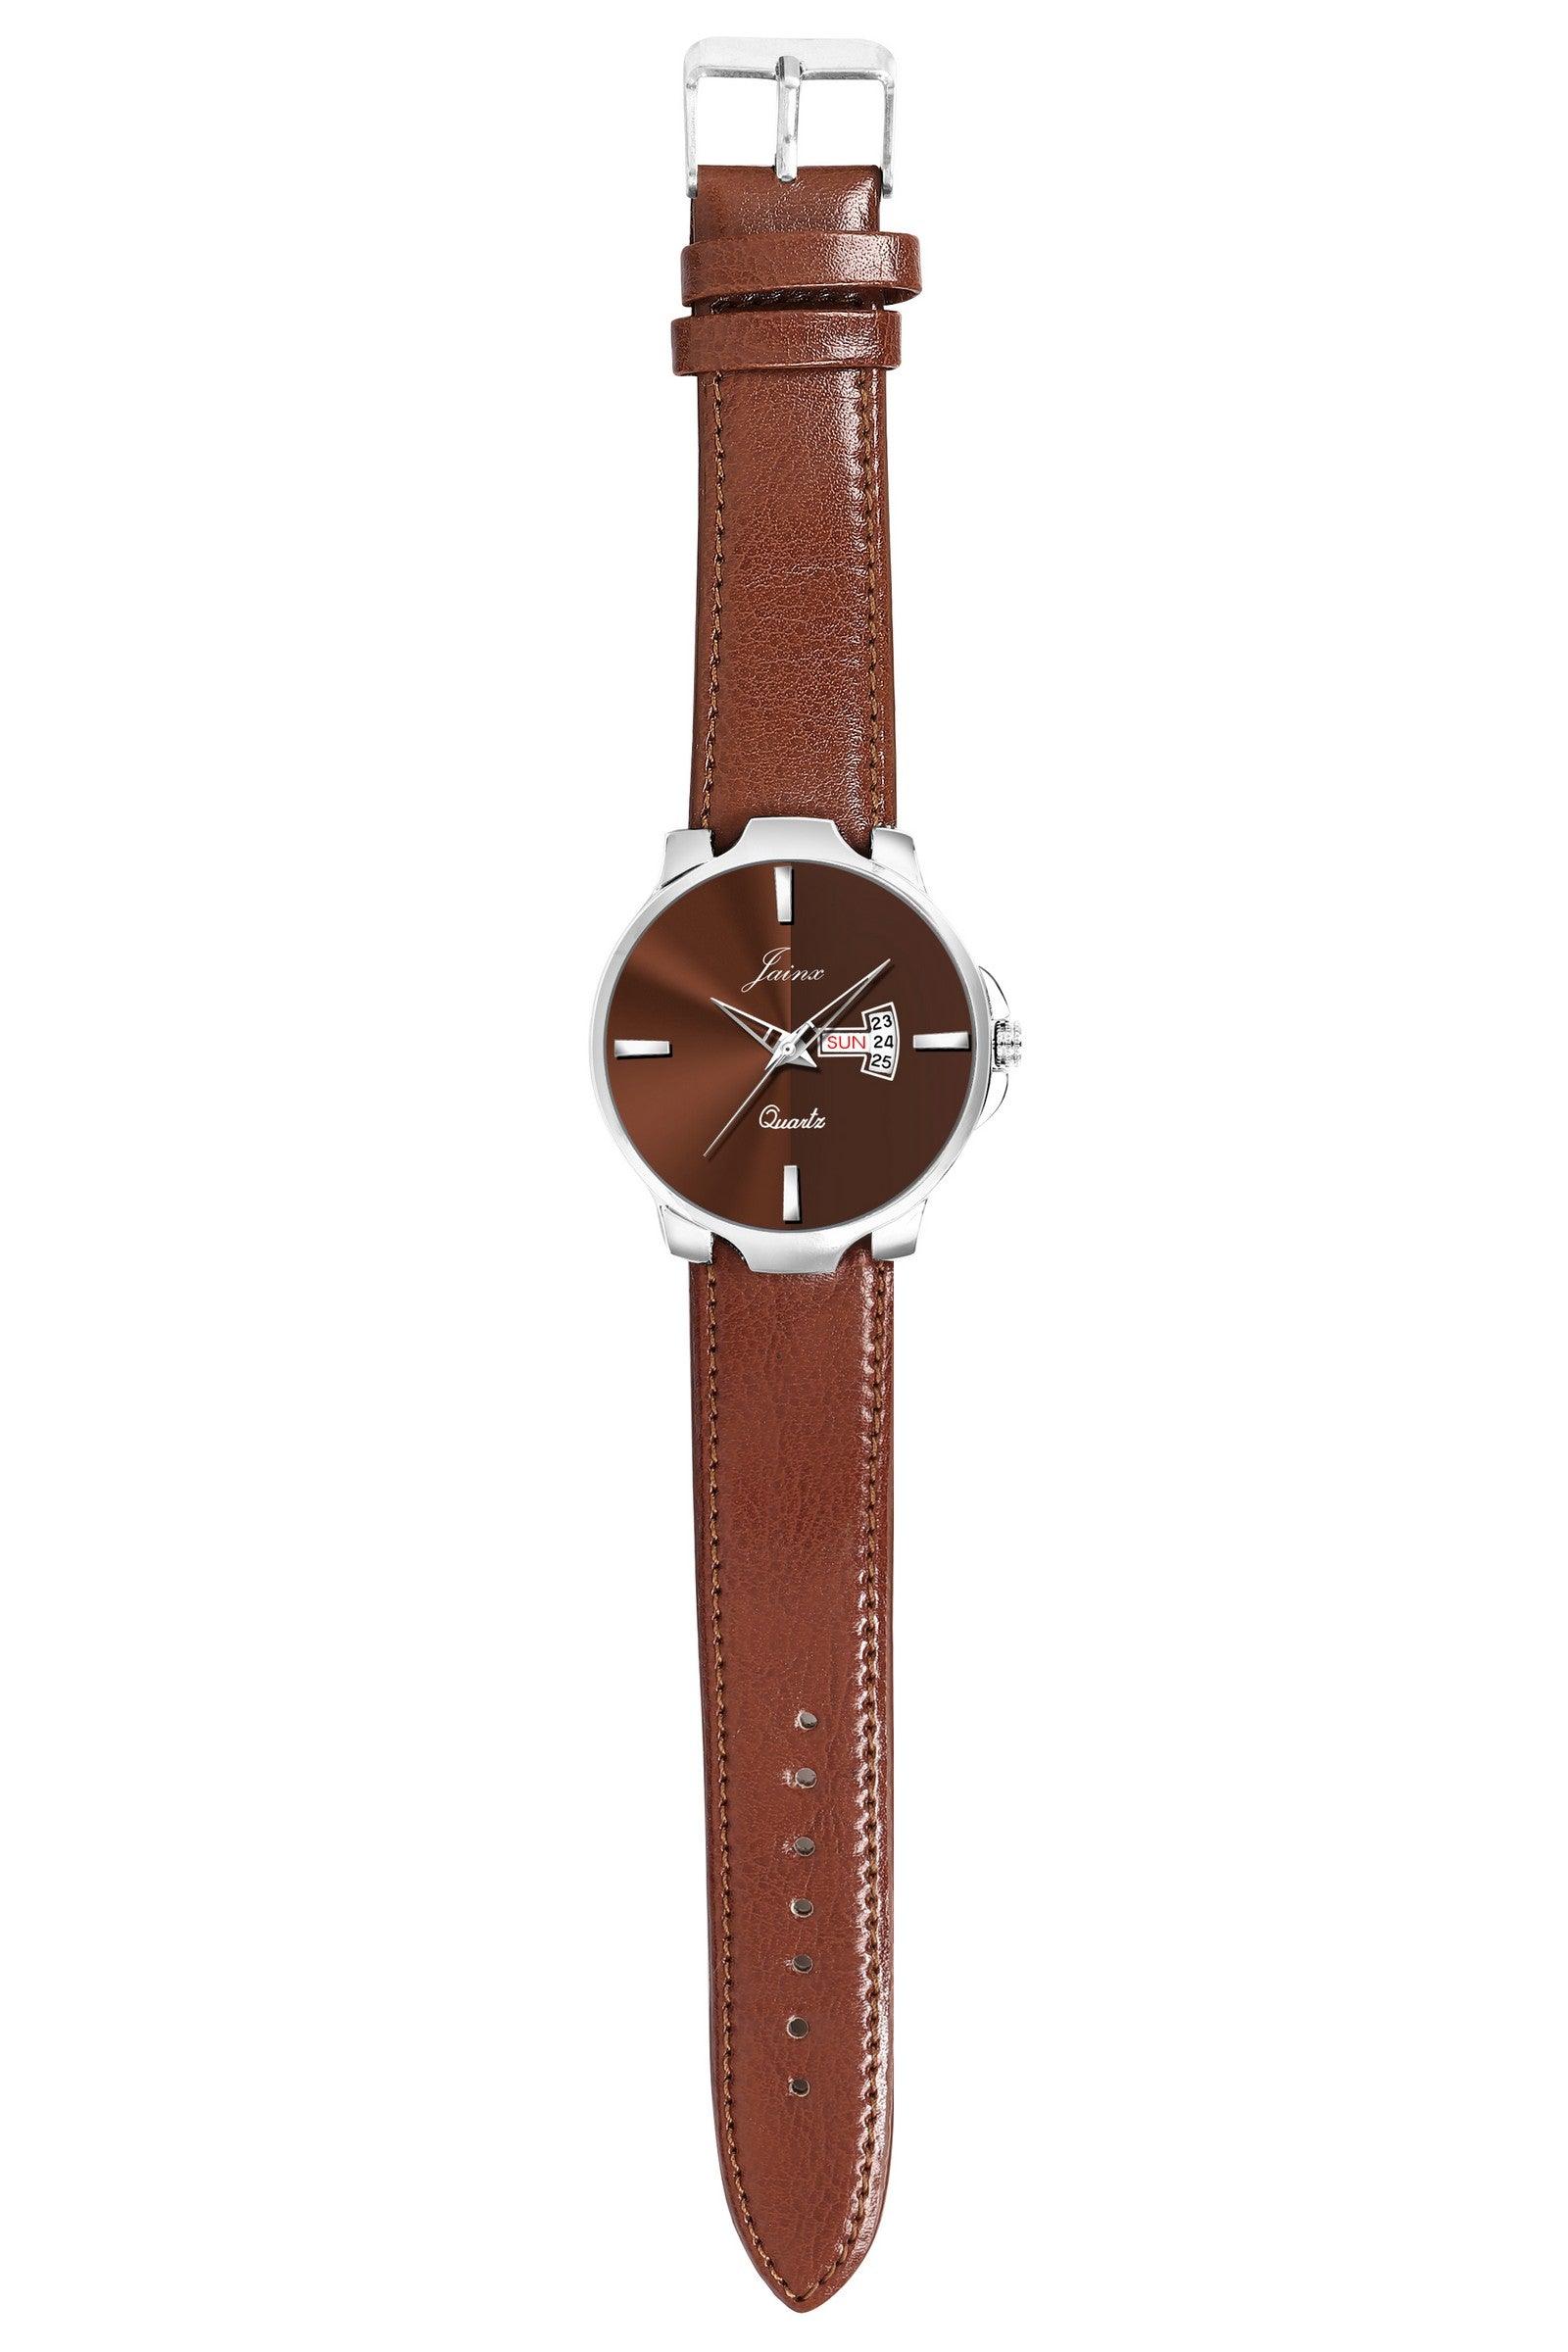 Jainx JM7132 Brown Day and Date Function Dial Leather Strap Analog Watch - For Men - Nice Deal Enterprises Pvt. Ltd.